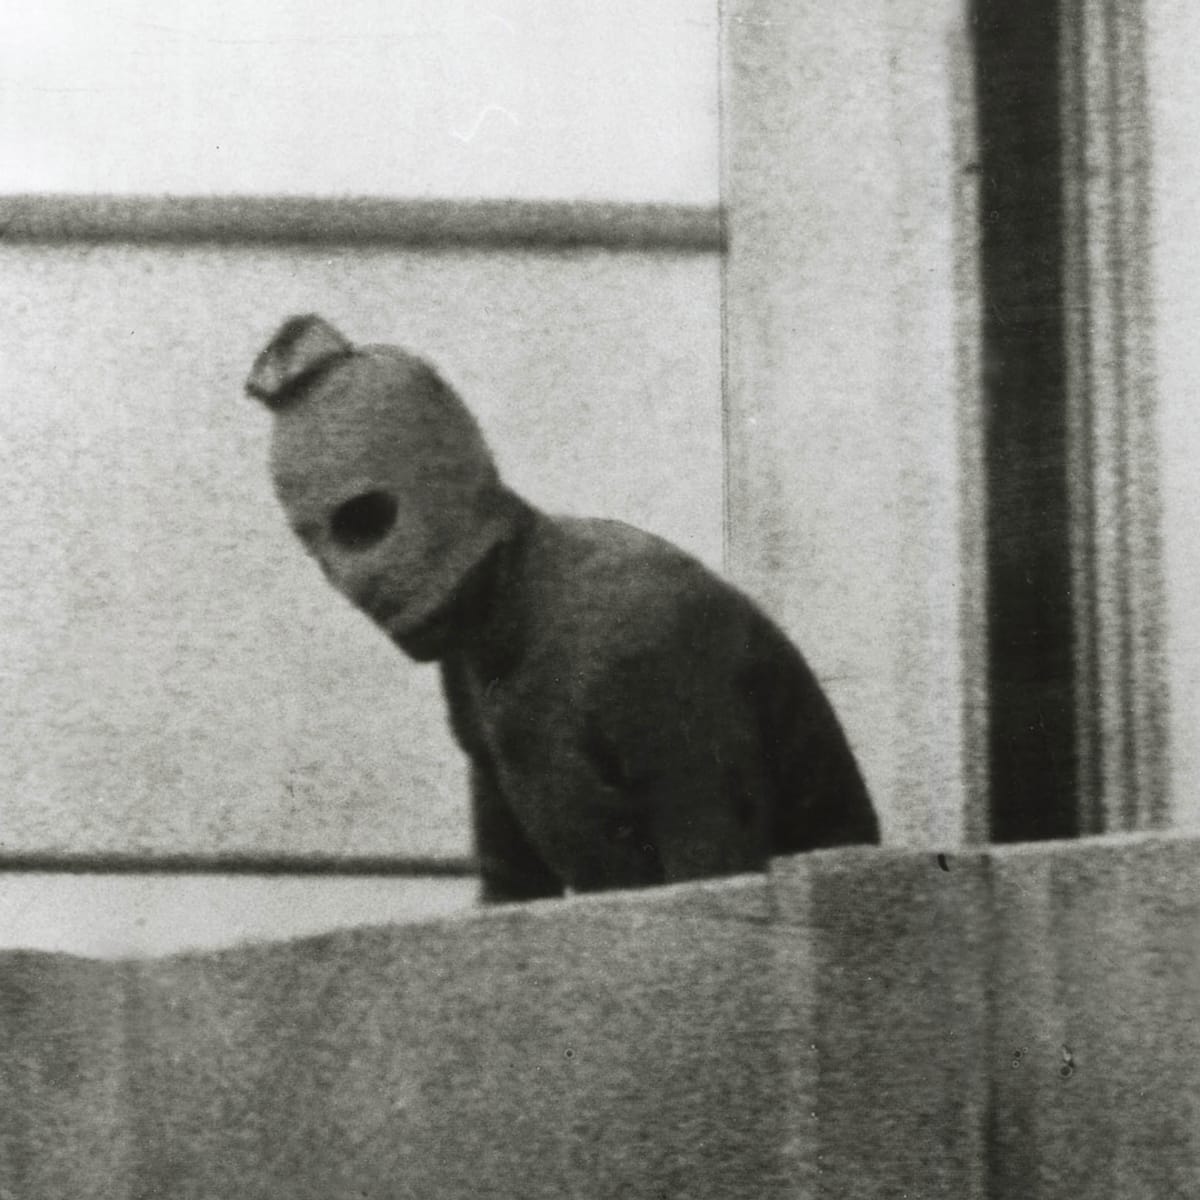 Fifty years ago (on Sep. 5, 1972, at the Munich Olympics), the threat of terrorism, as we know it today, was born